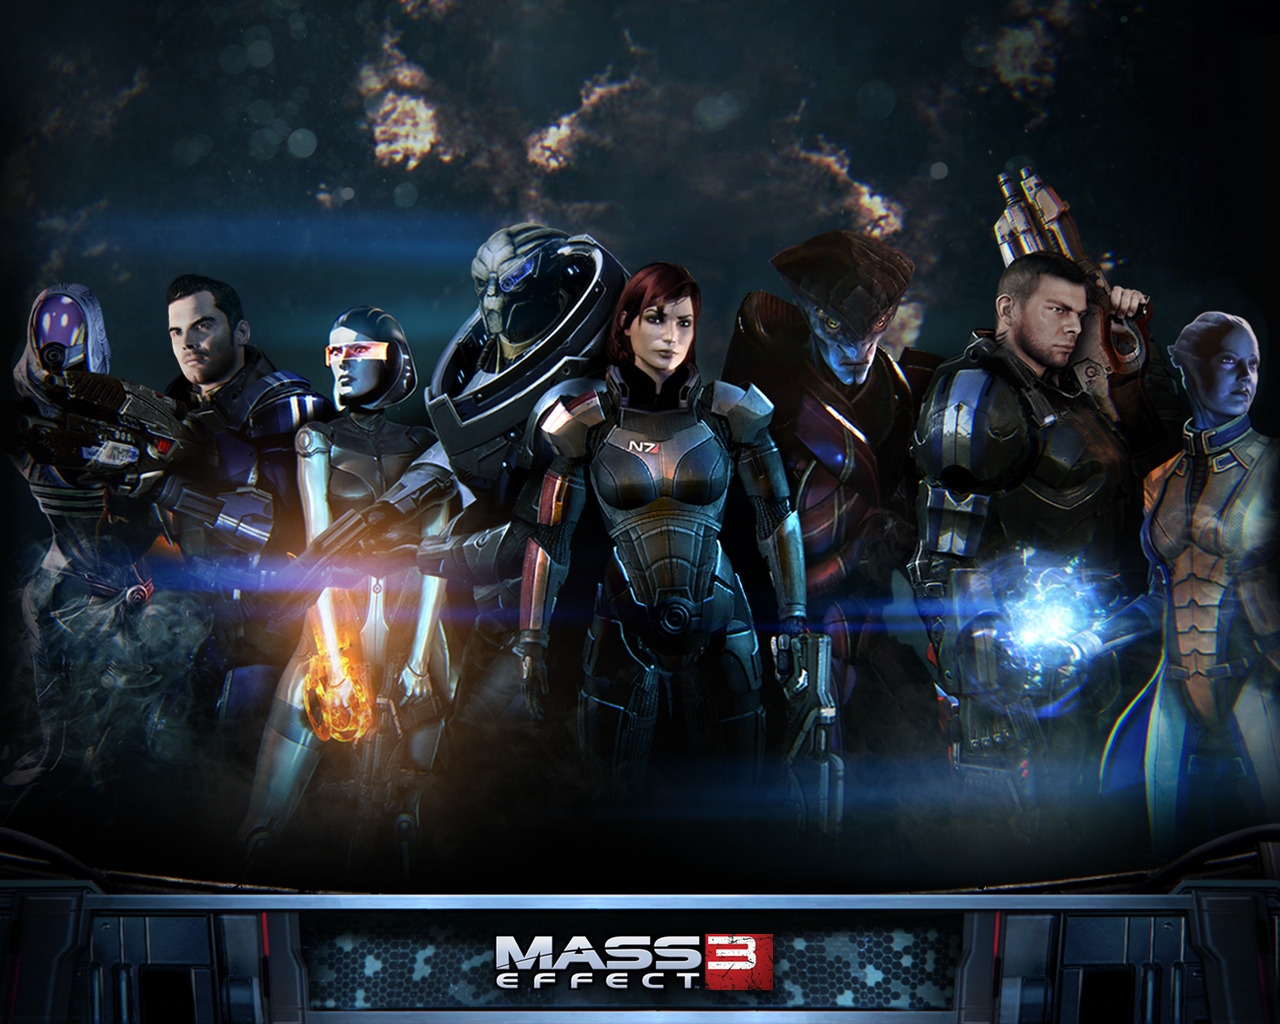 Mass Effect 3 Characters for 1280 x 1024 resolution